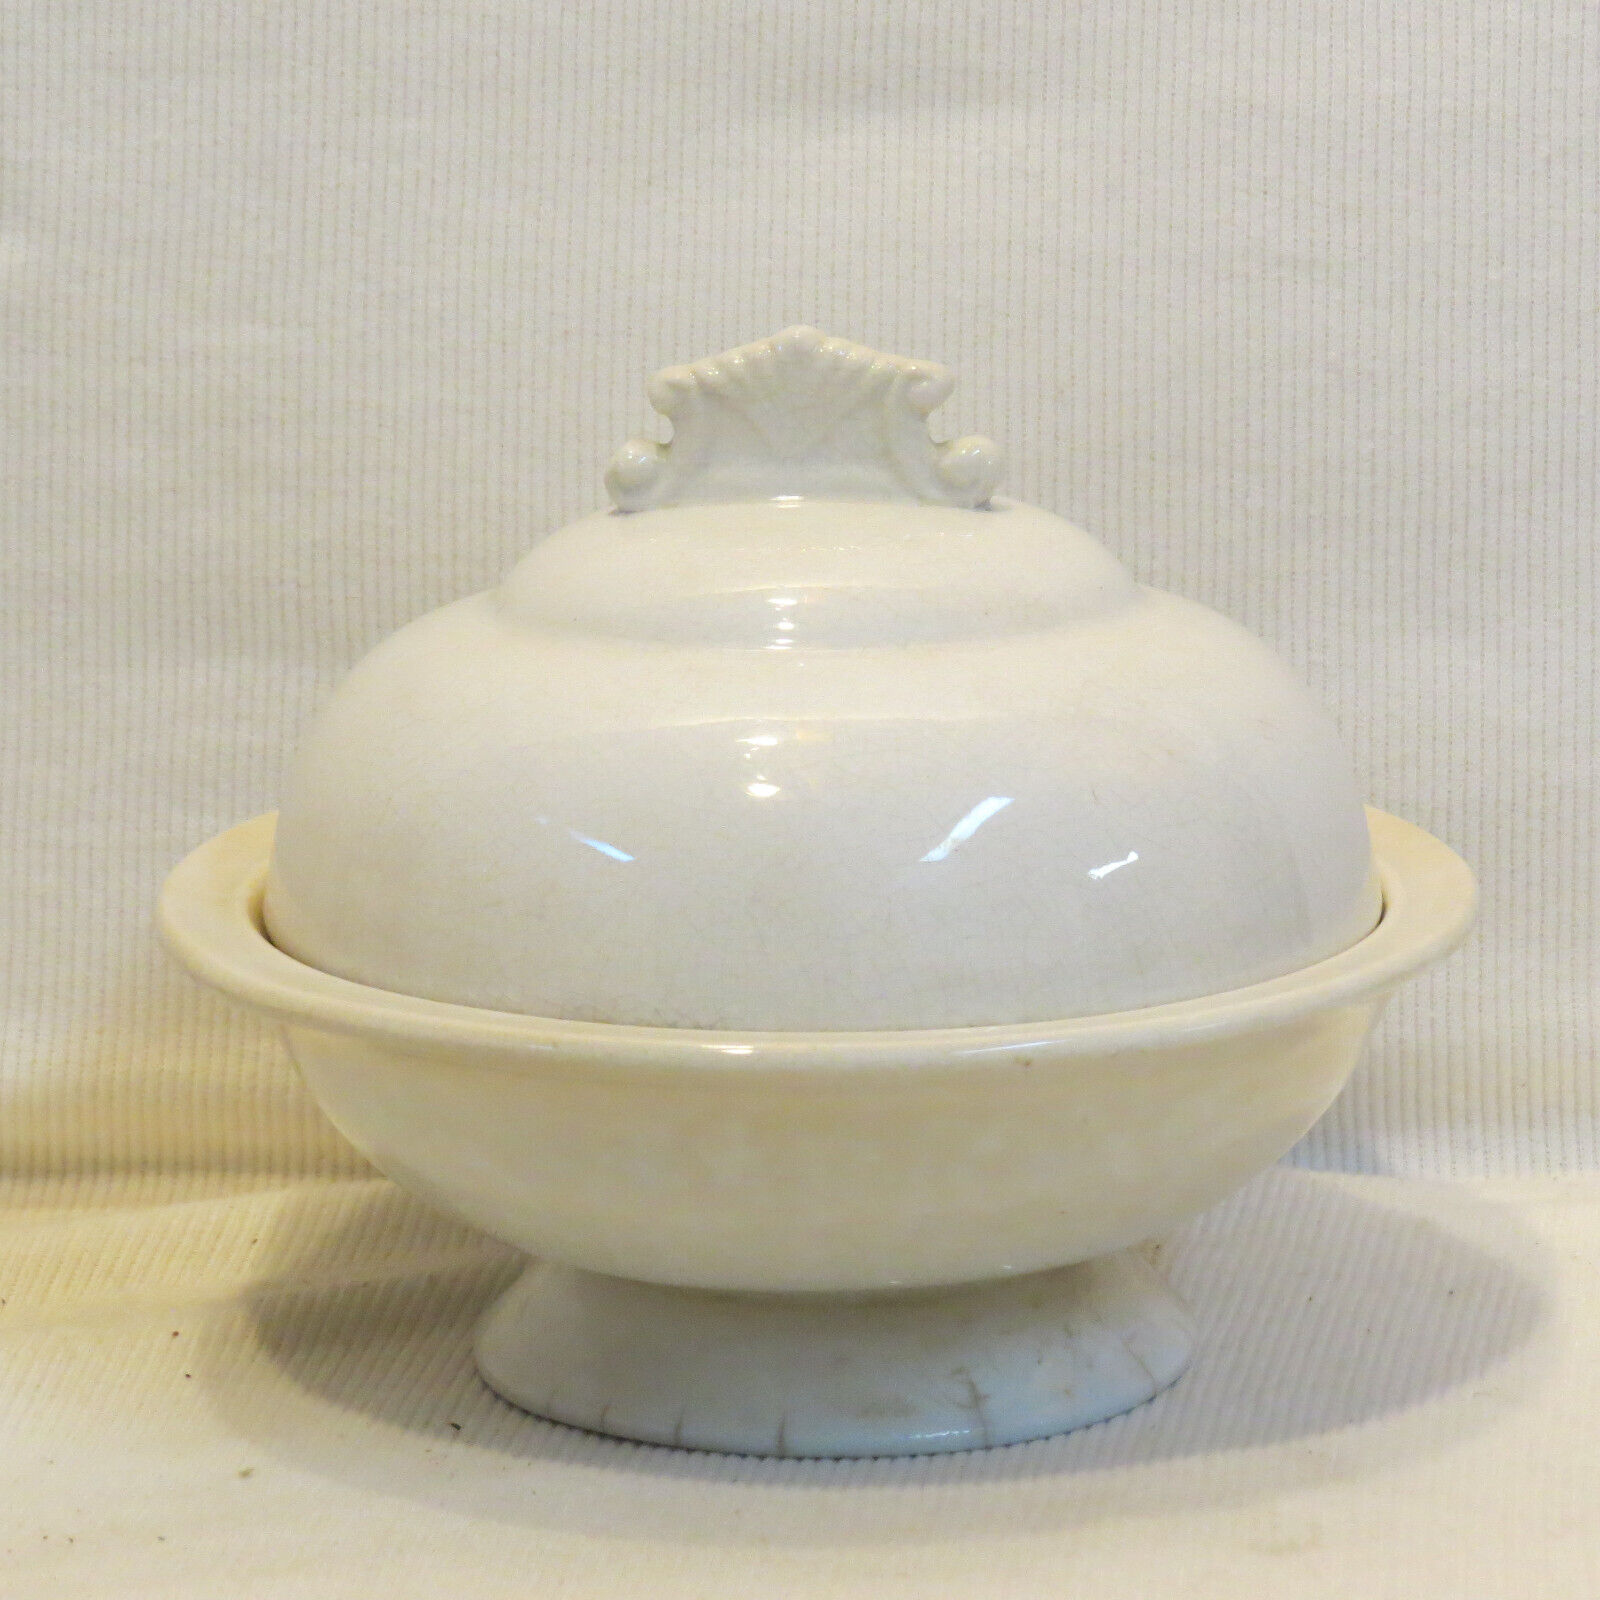 RARE Antique Homer Laughlin VICTOR WHITE Covered Soap Dish with original insert